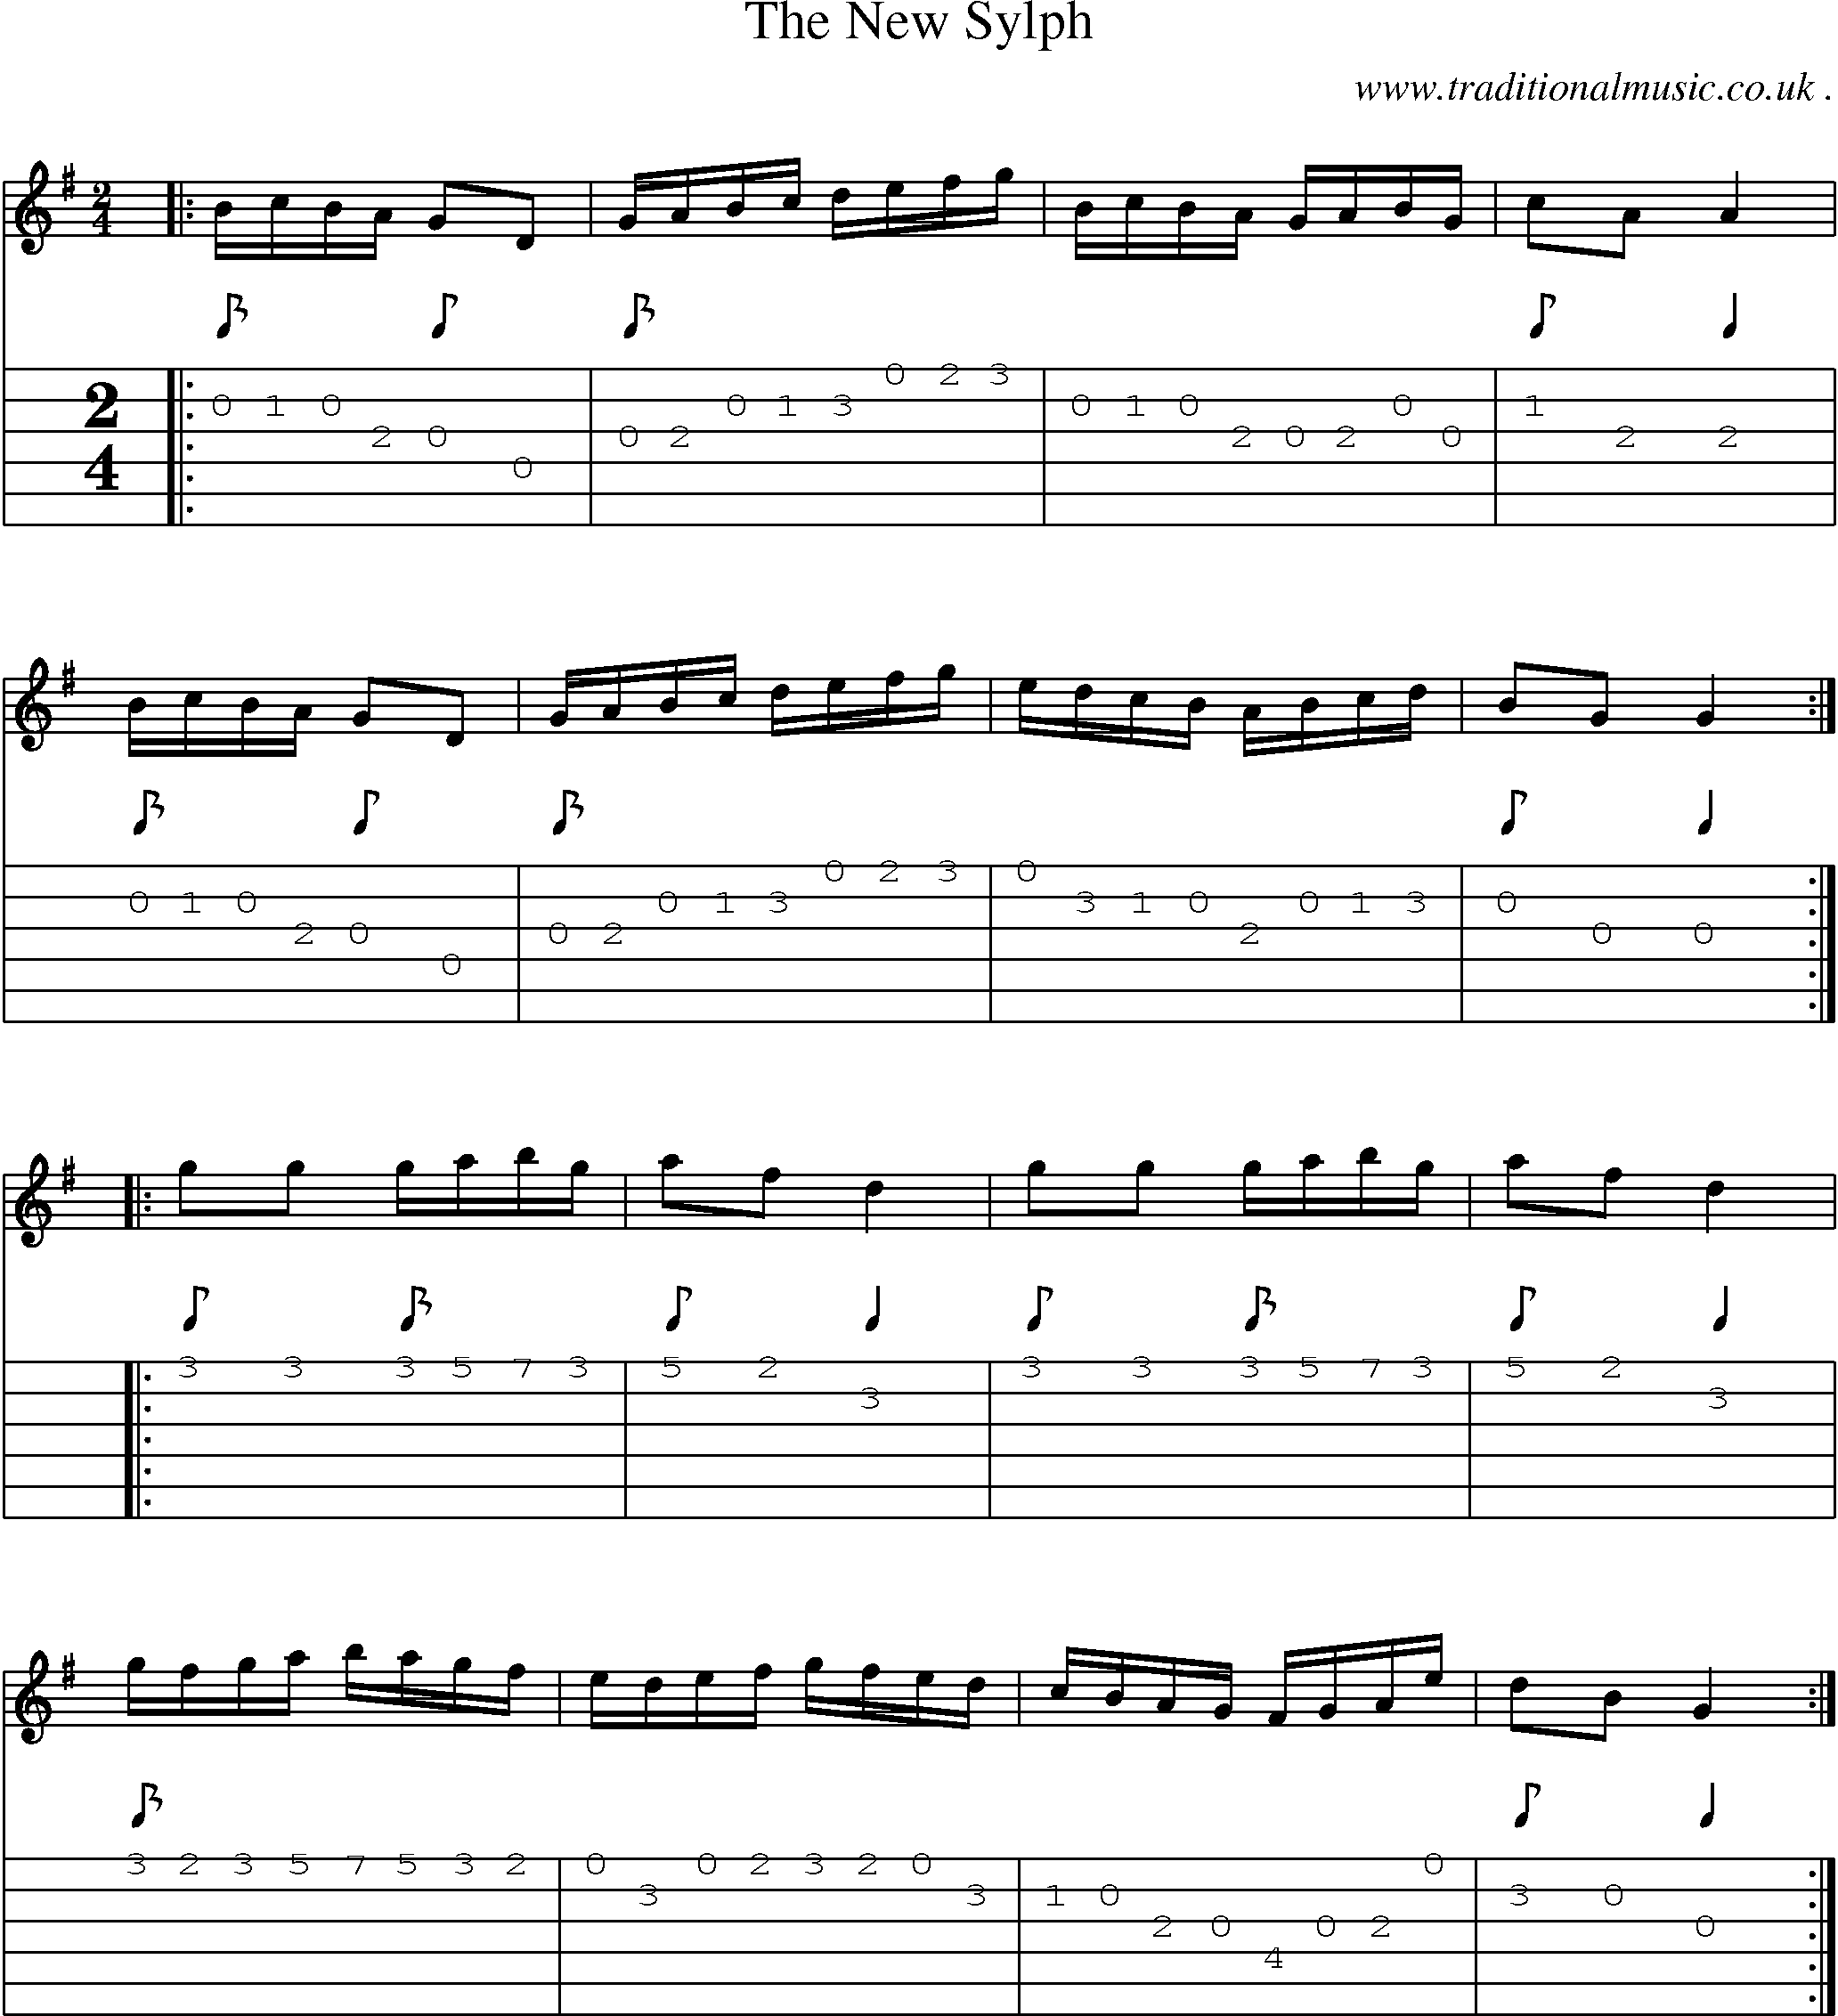 Sheet-Music and Guitar Tabs for The New Sylph